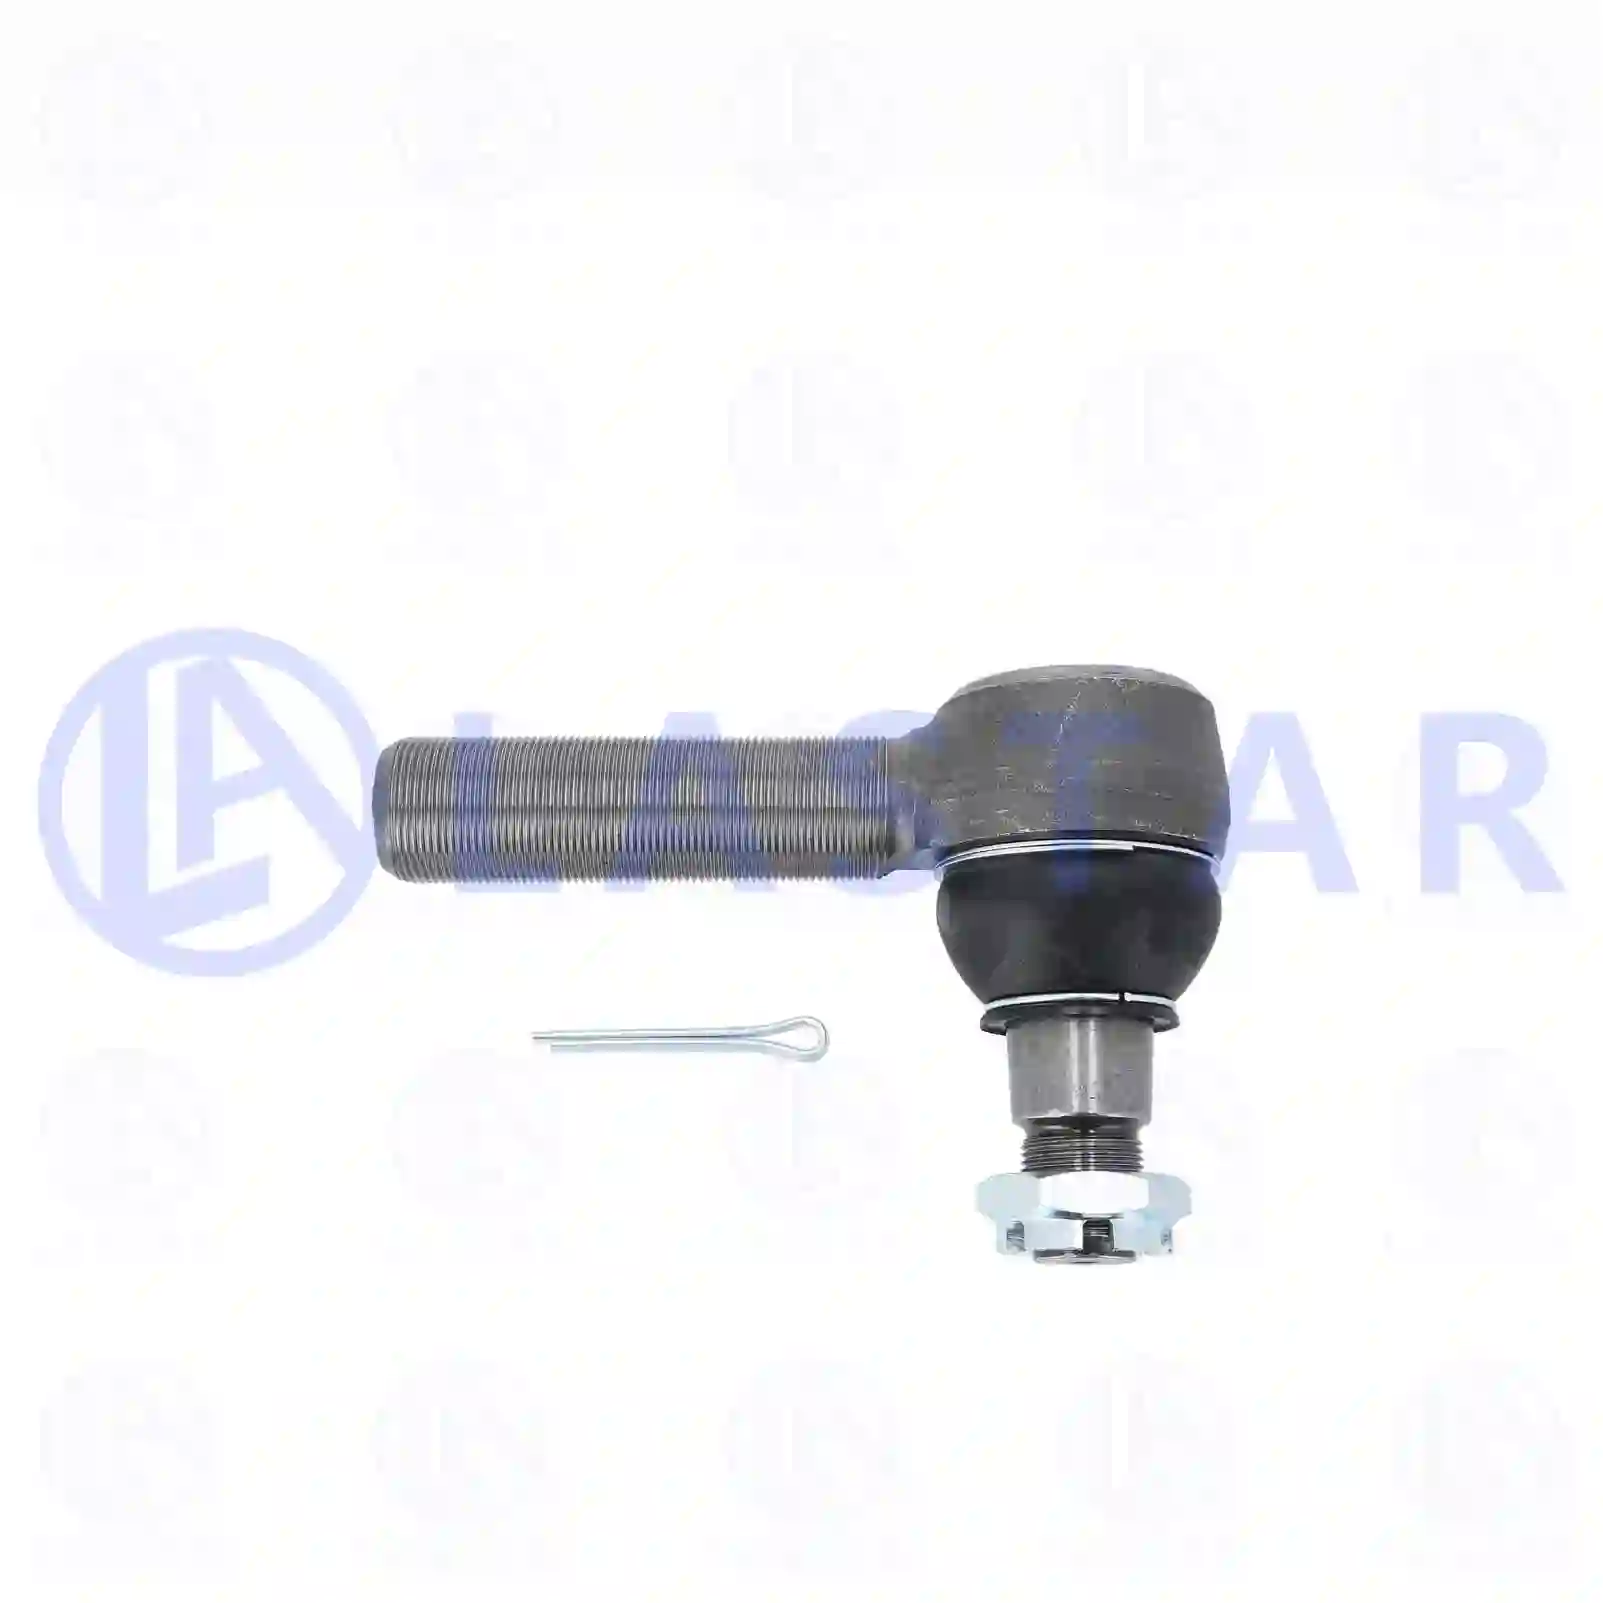 Ball joint, left hand thread, 77731179, 5001867640, ZG40361-0008, , , ||  77731179 Lastar Spare Part | Truck Spare Parts, Auotomotive Spare Parts Ball joint, left hand thread, 77731179, 5001867640, ZG40361-0008, , , ||  77731179 Lastar Spare Part | Truck Spare Parts, Auotomotive Spare Parts